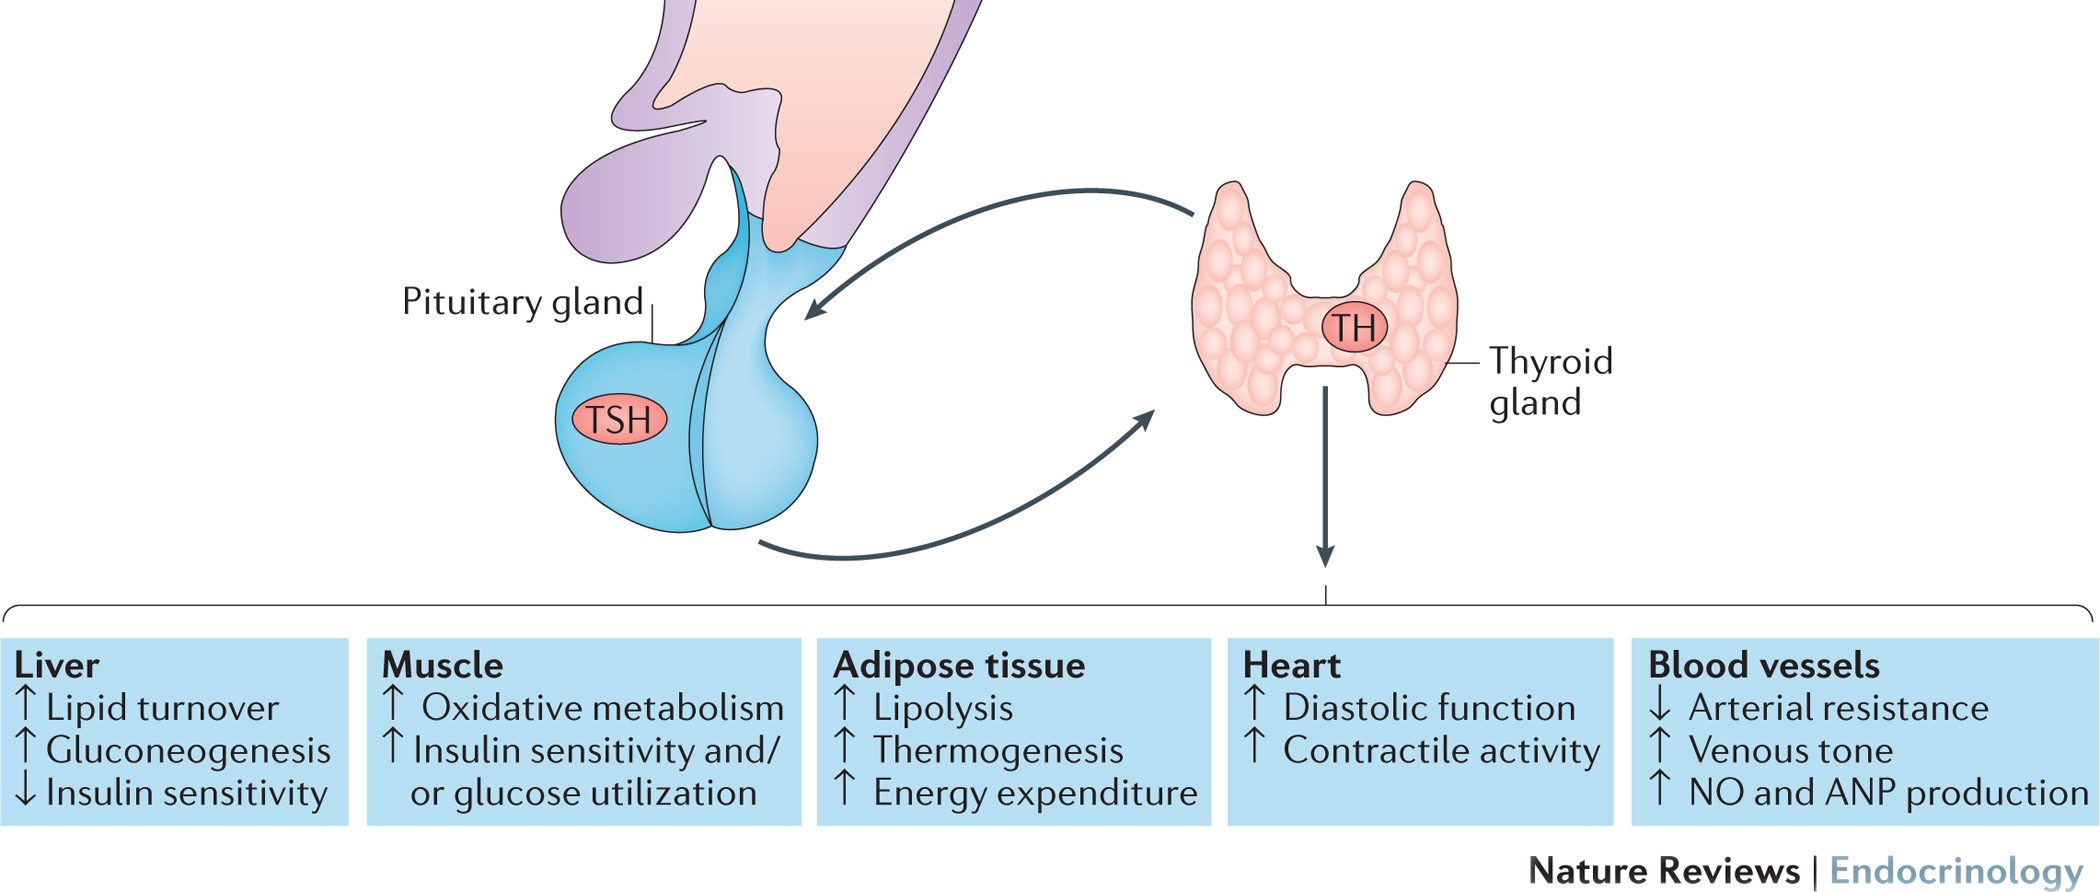 hypothyroidism in childhood — current knowledge and open issues | Nature Reviews Endocrinology